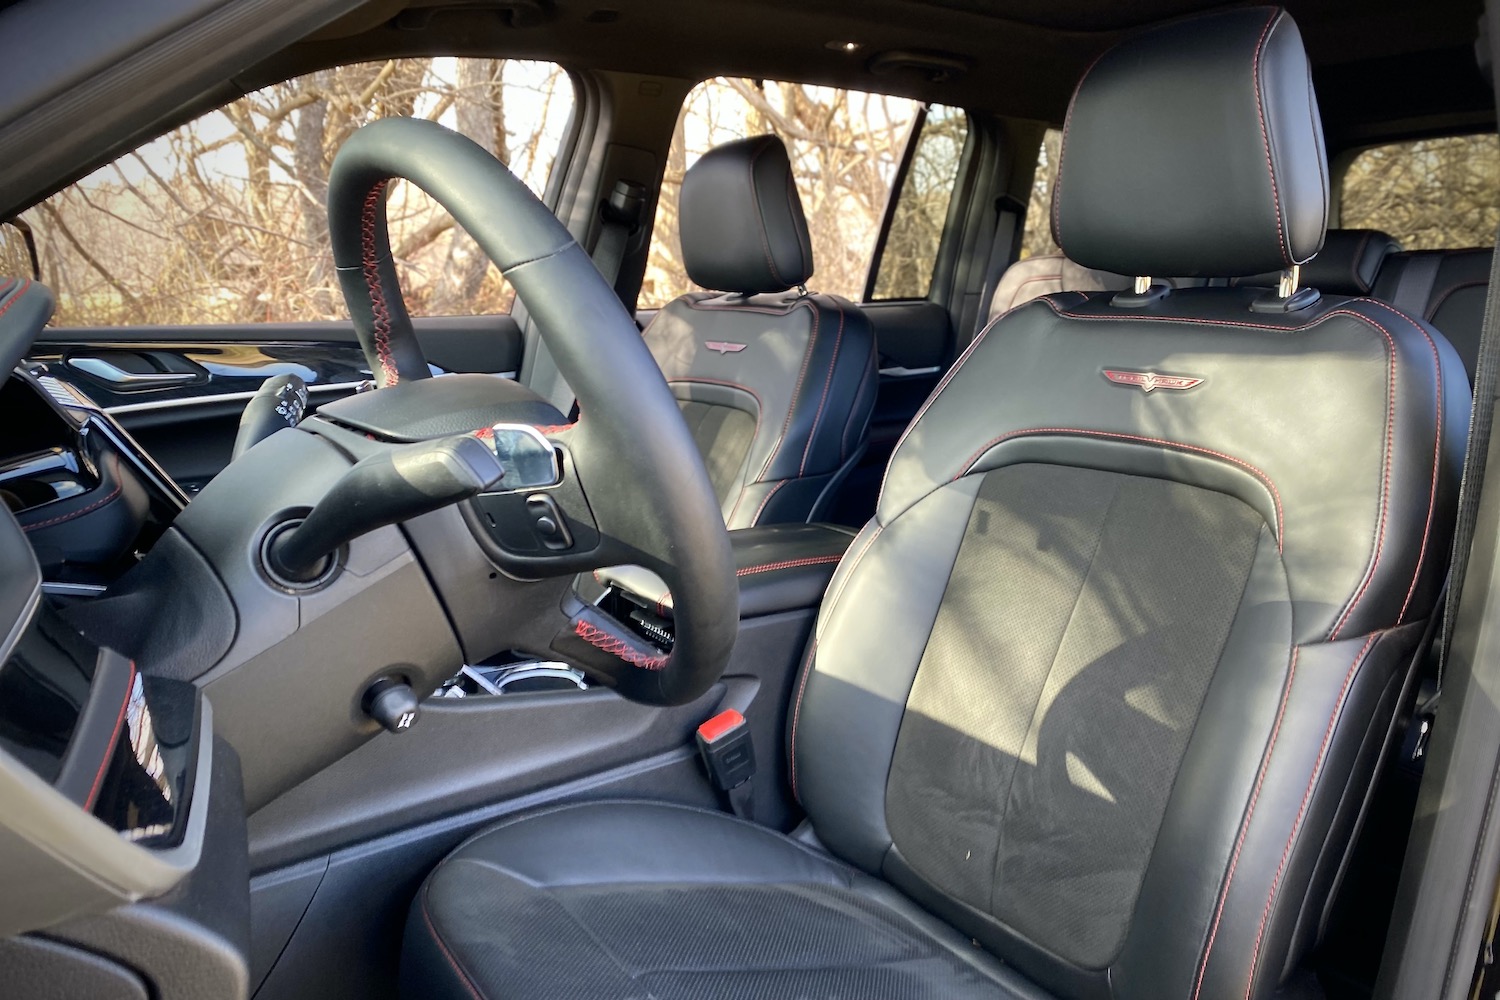 Front driver's seat in 2022 Jeep Grand Cherokee Trailhawk from outside the SUV.